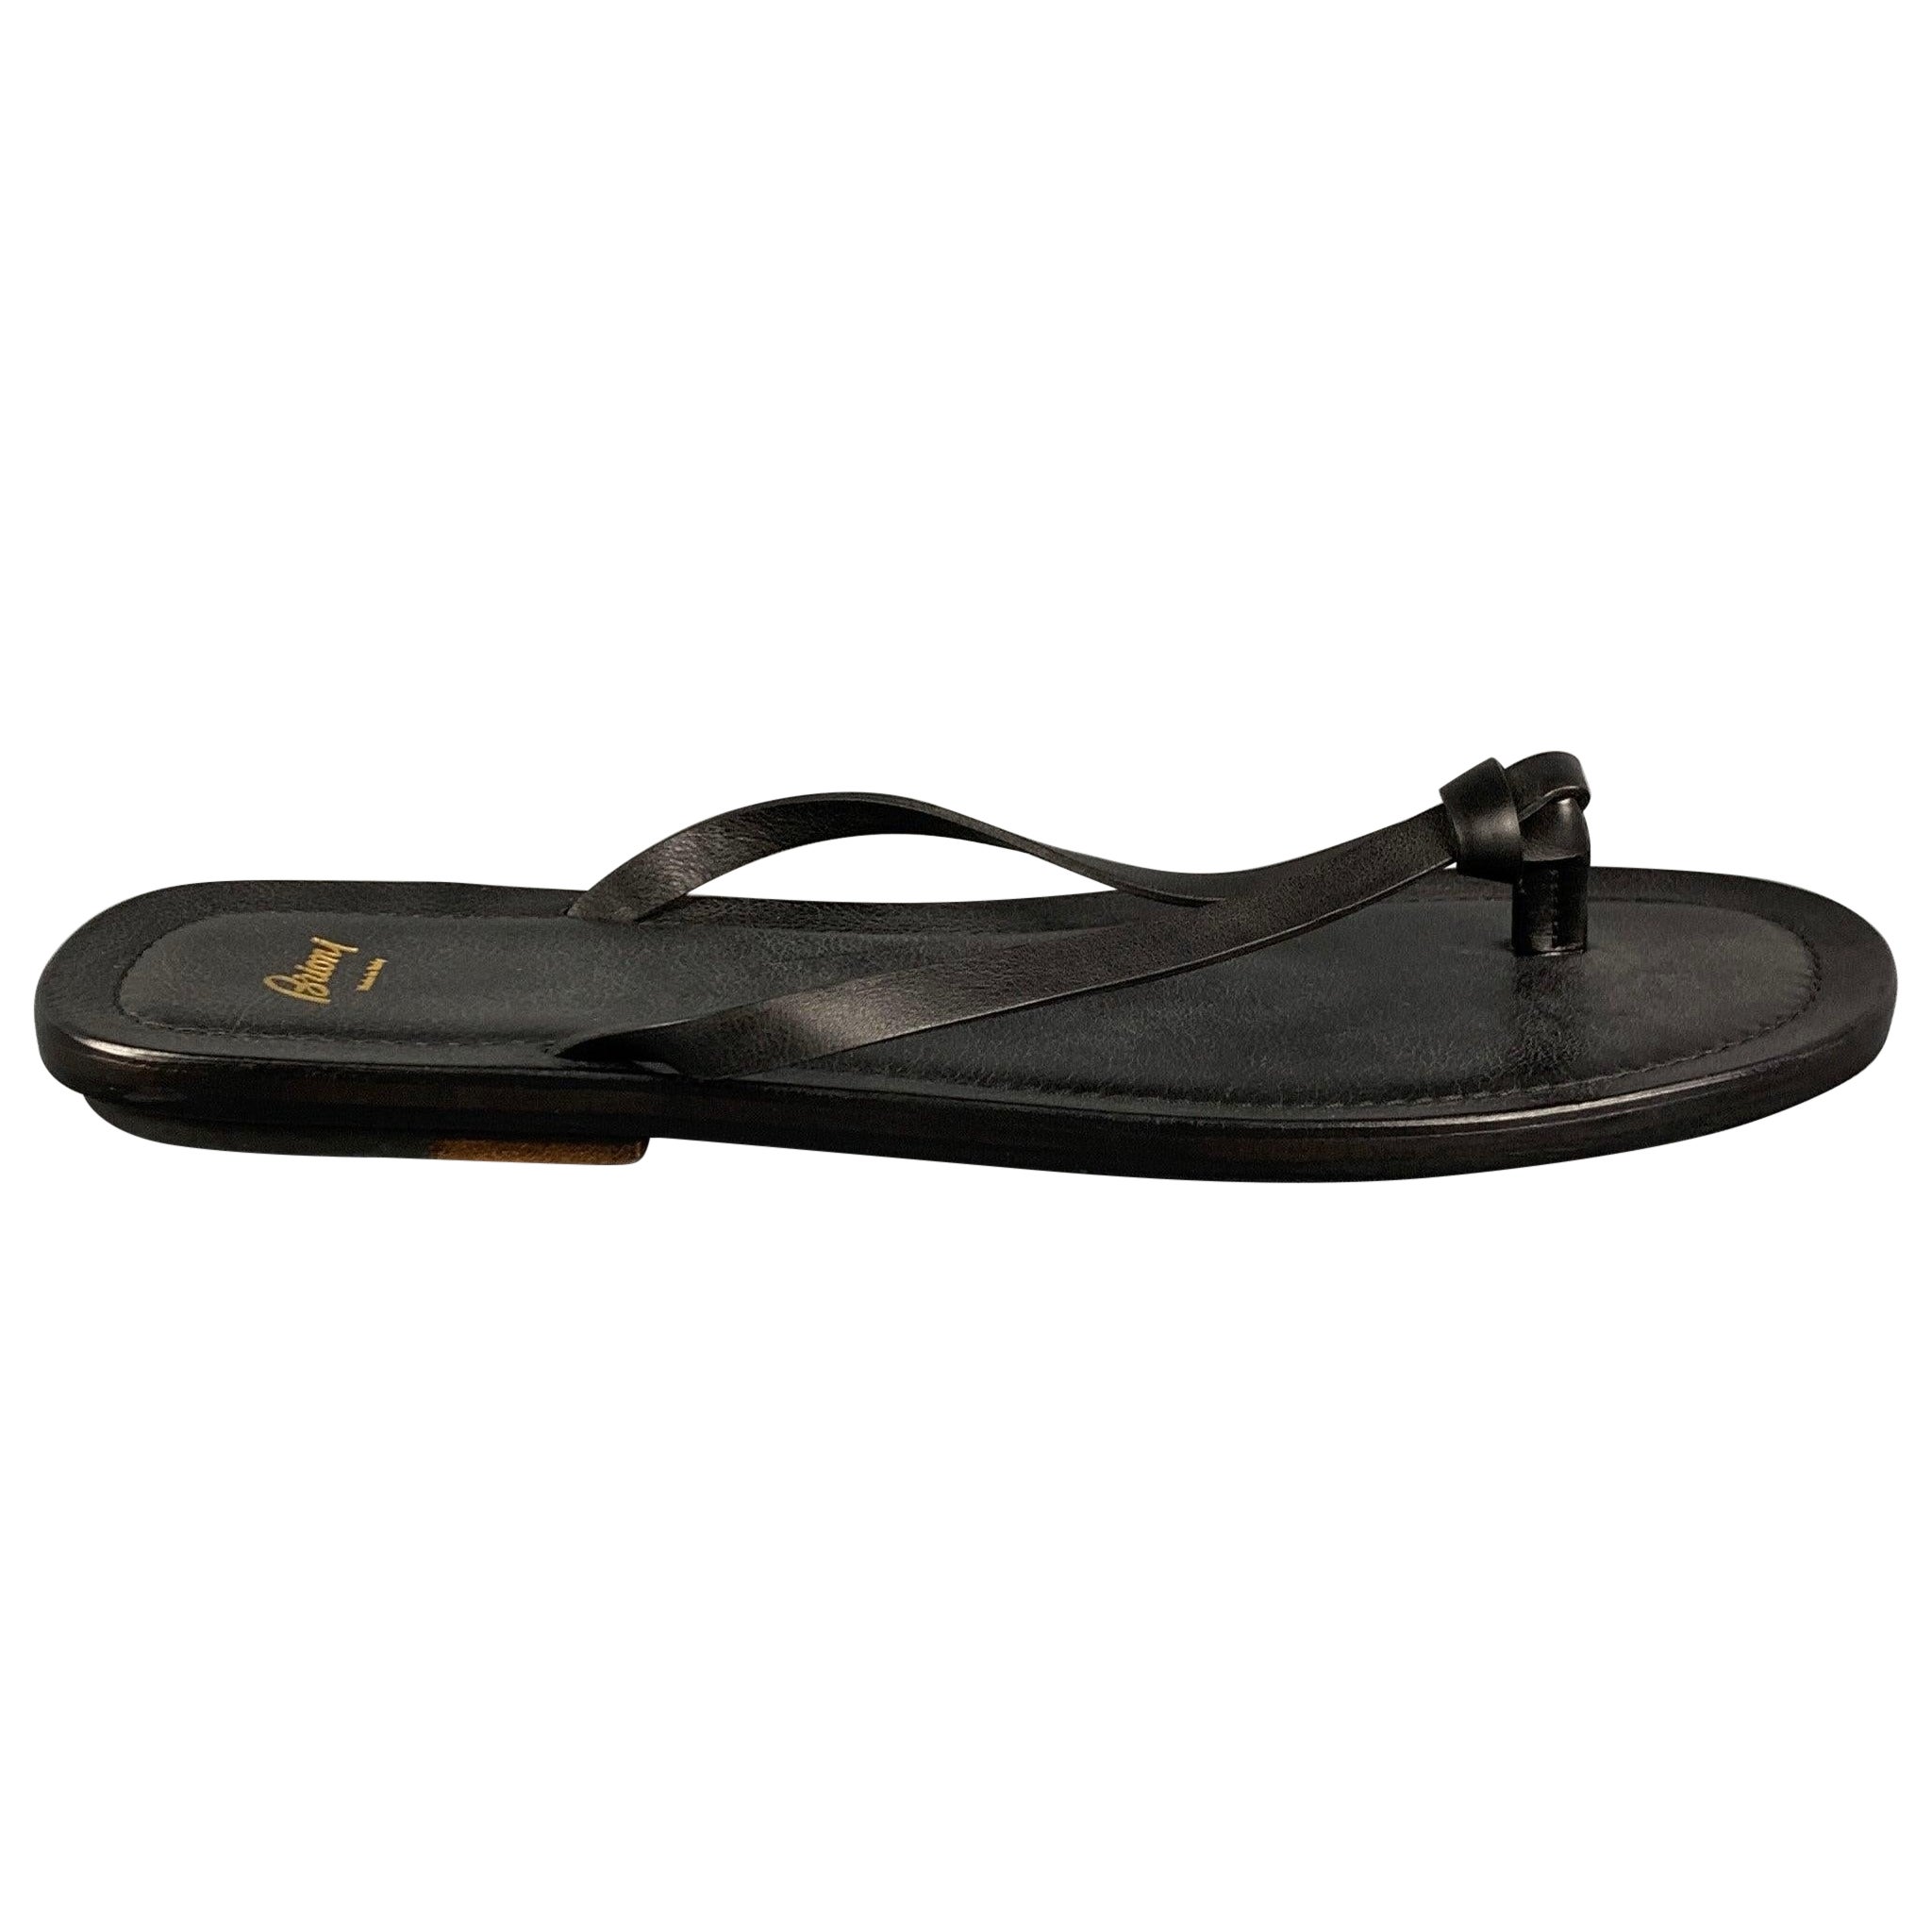 BRIONI Size 13 Black Leather Thong Sandals For Sale